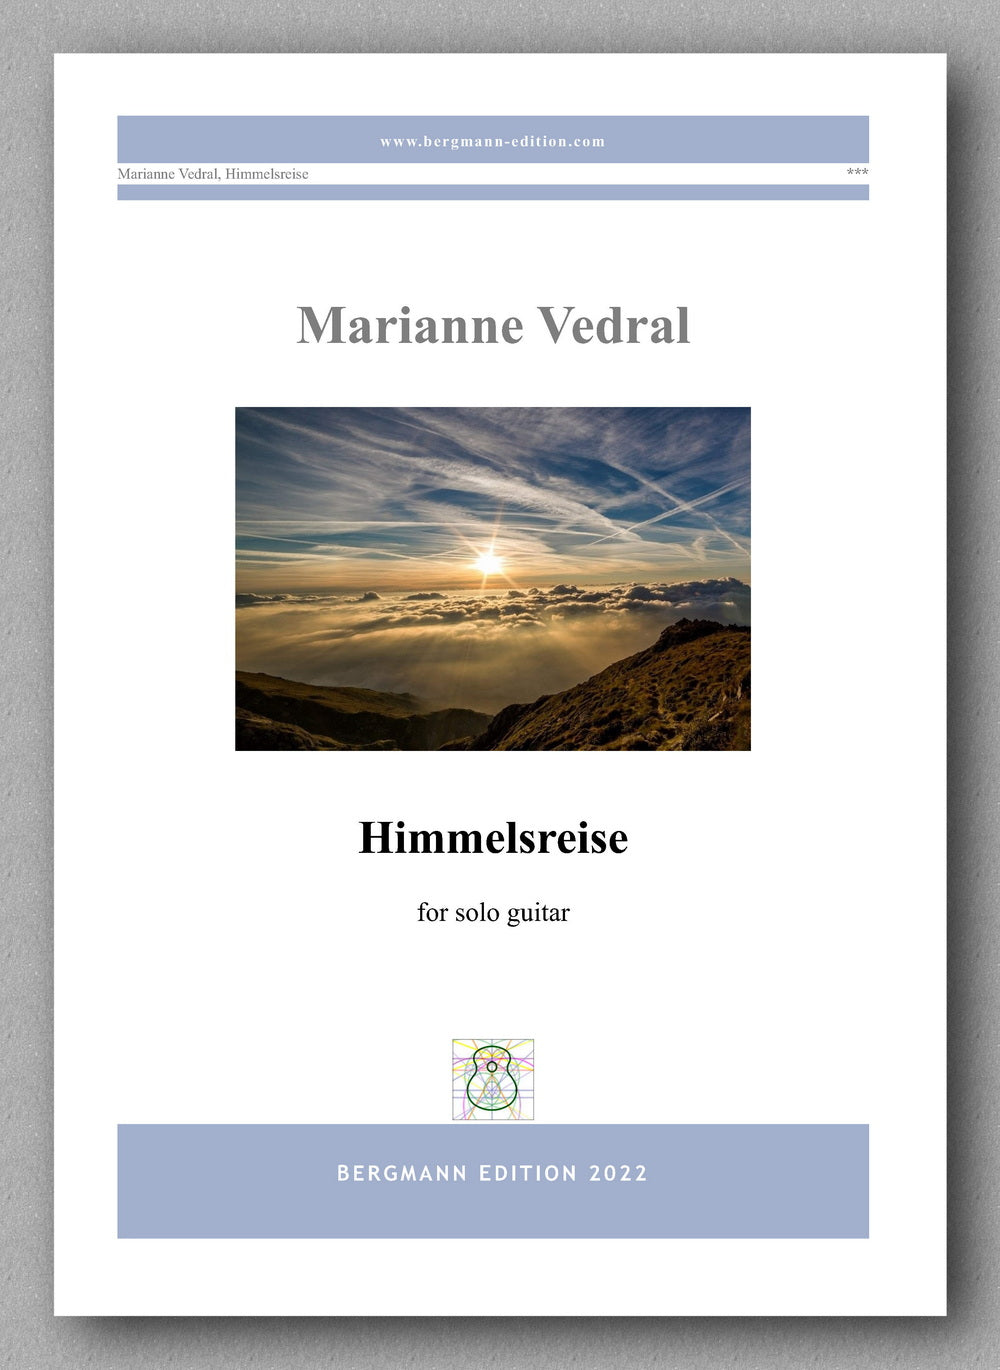 Himmelsreise by Marianne Vedral - preview of the cover